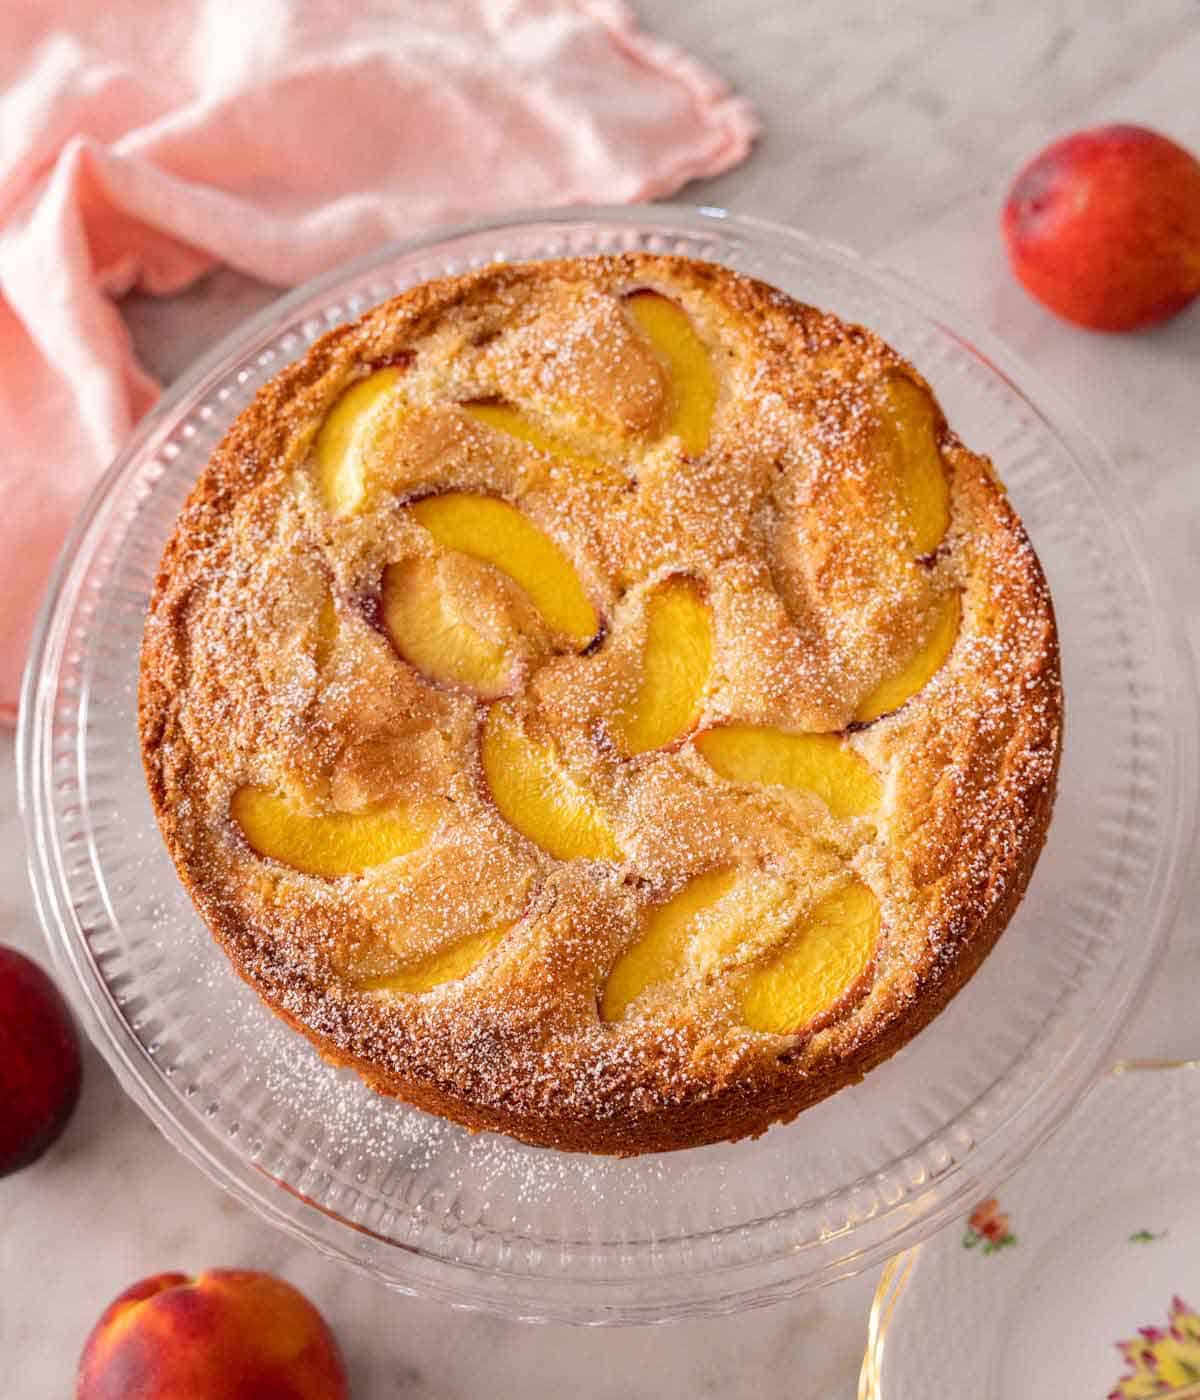 Overhead view of a peach cake on a cake stand with fresh peaches scattered around.